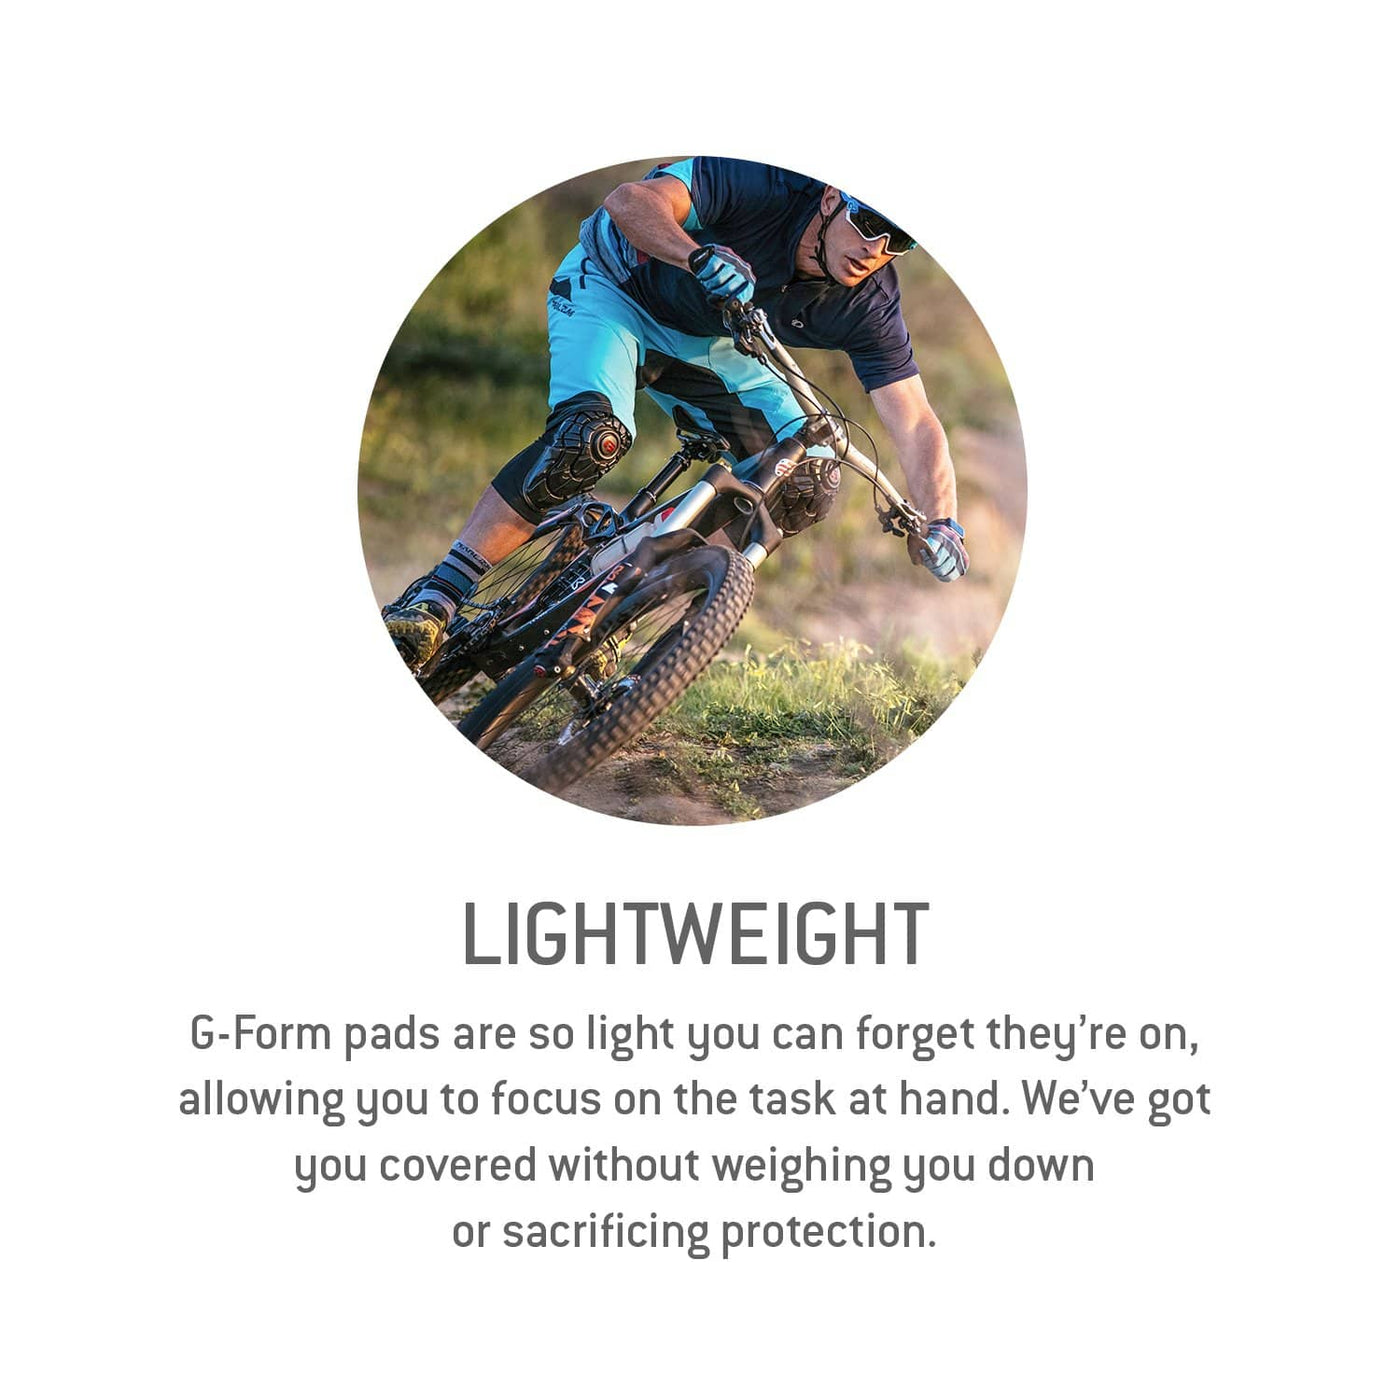 Lightweight protection for mtb, bmx